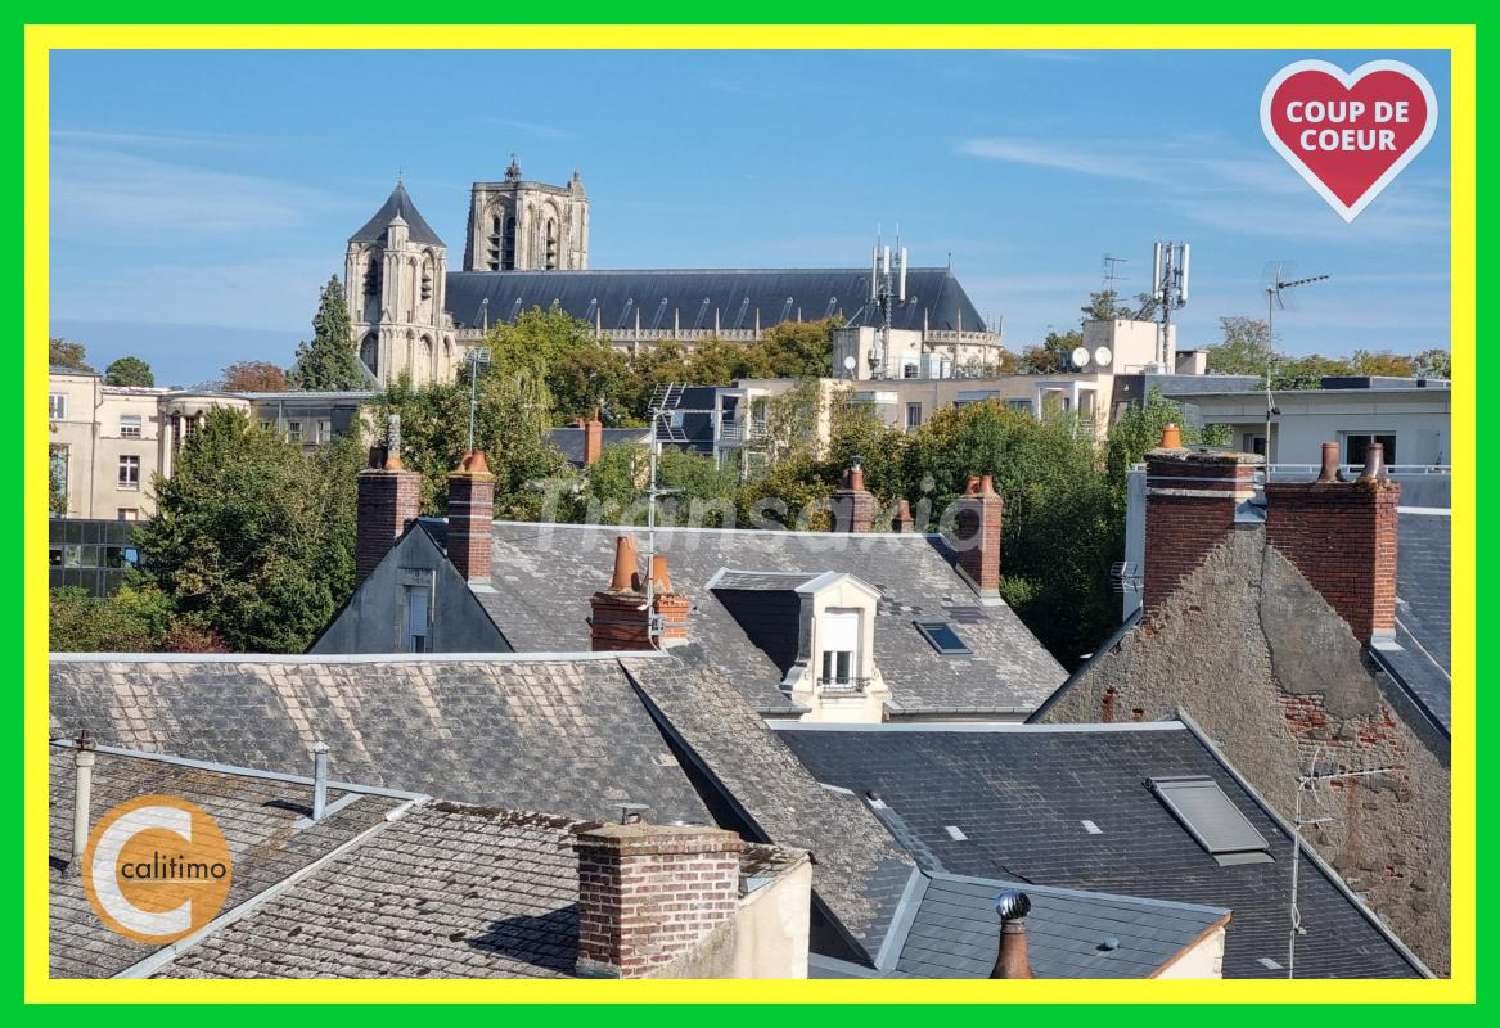  for sale house Bourges Cher 1